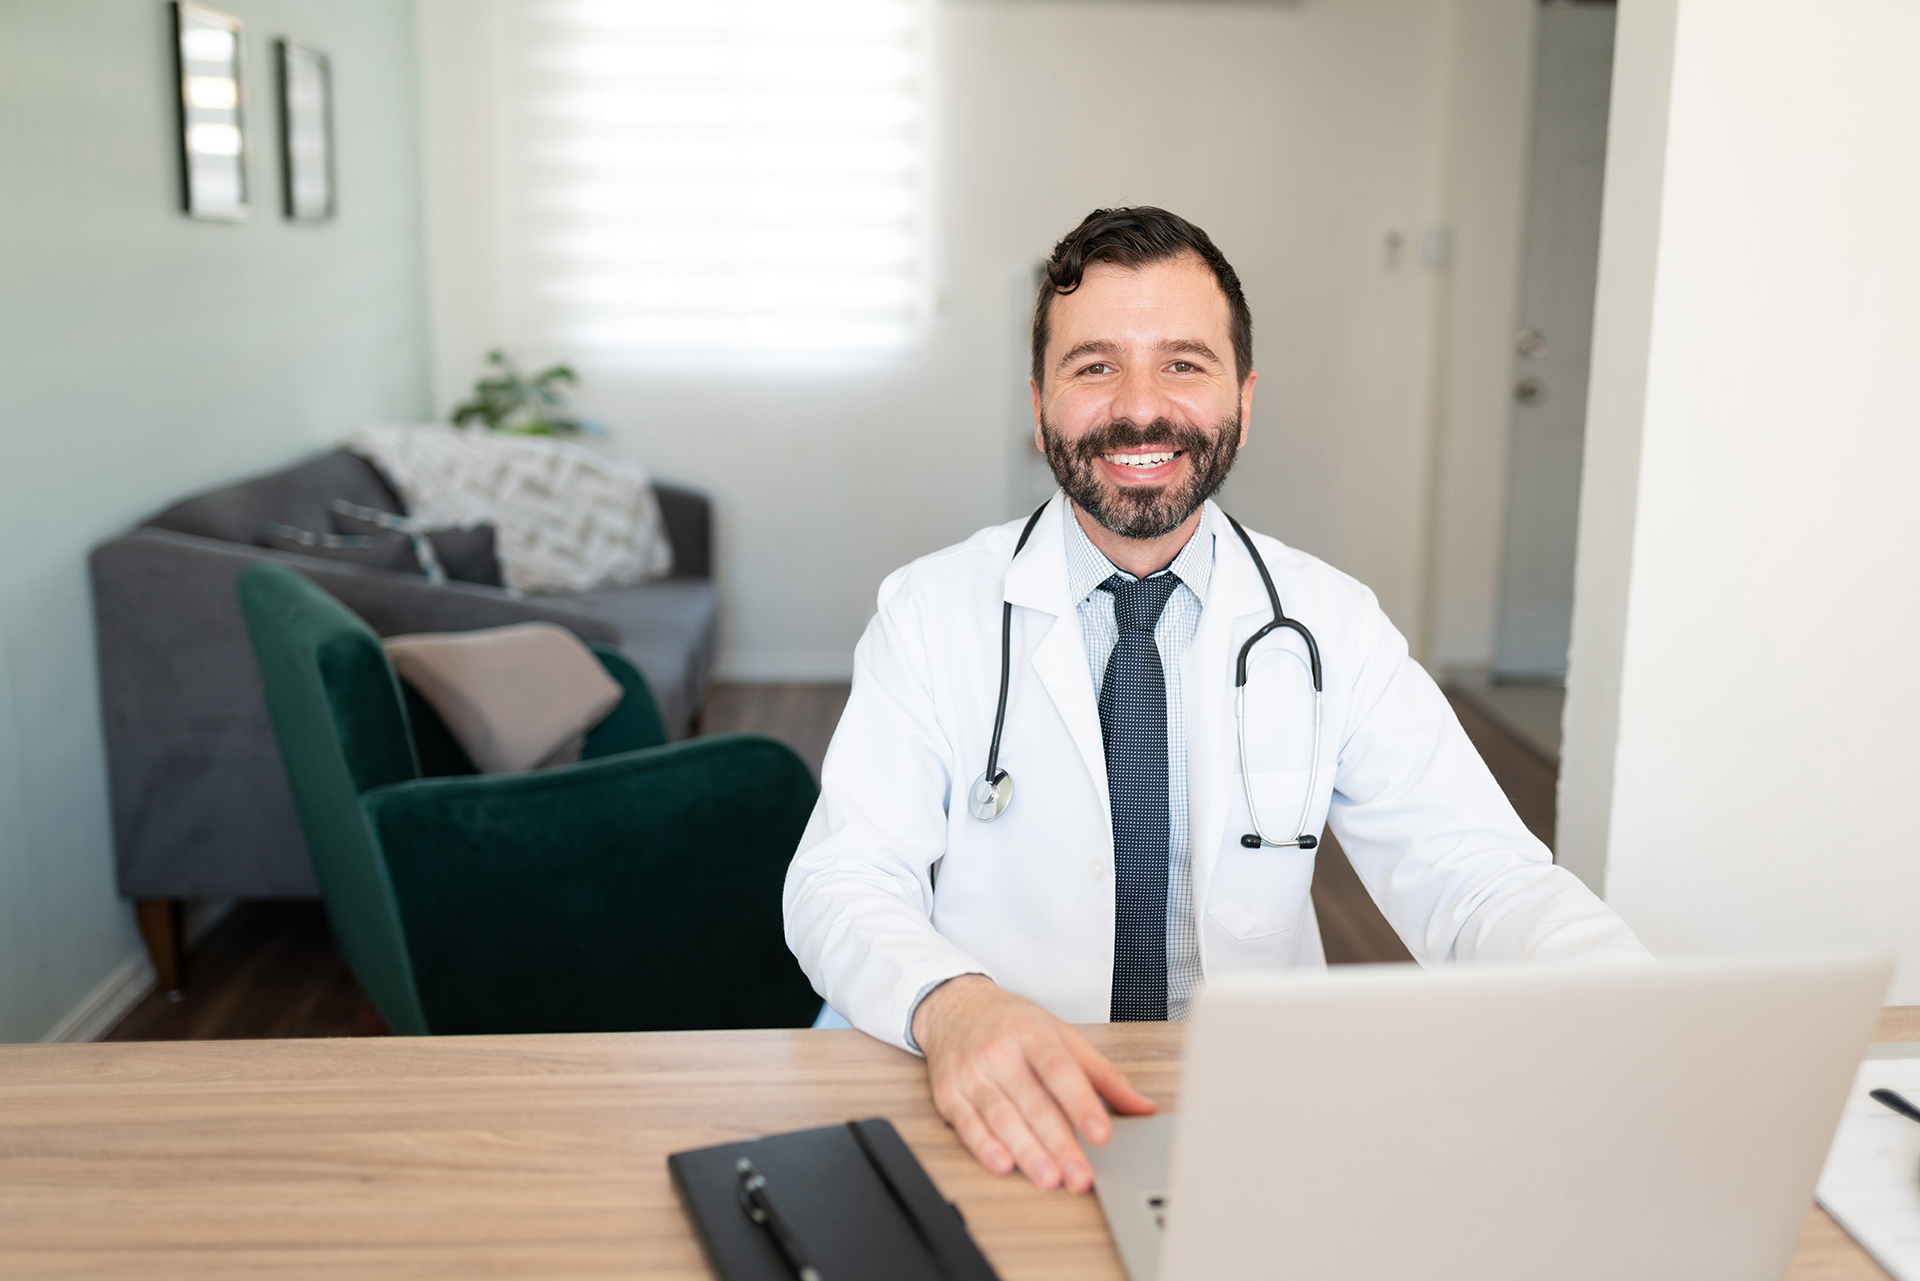 A doctor working from home on his laptop to speak with colleagues and patients